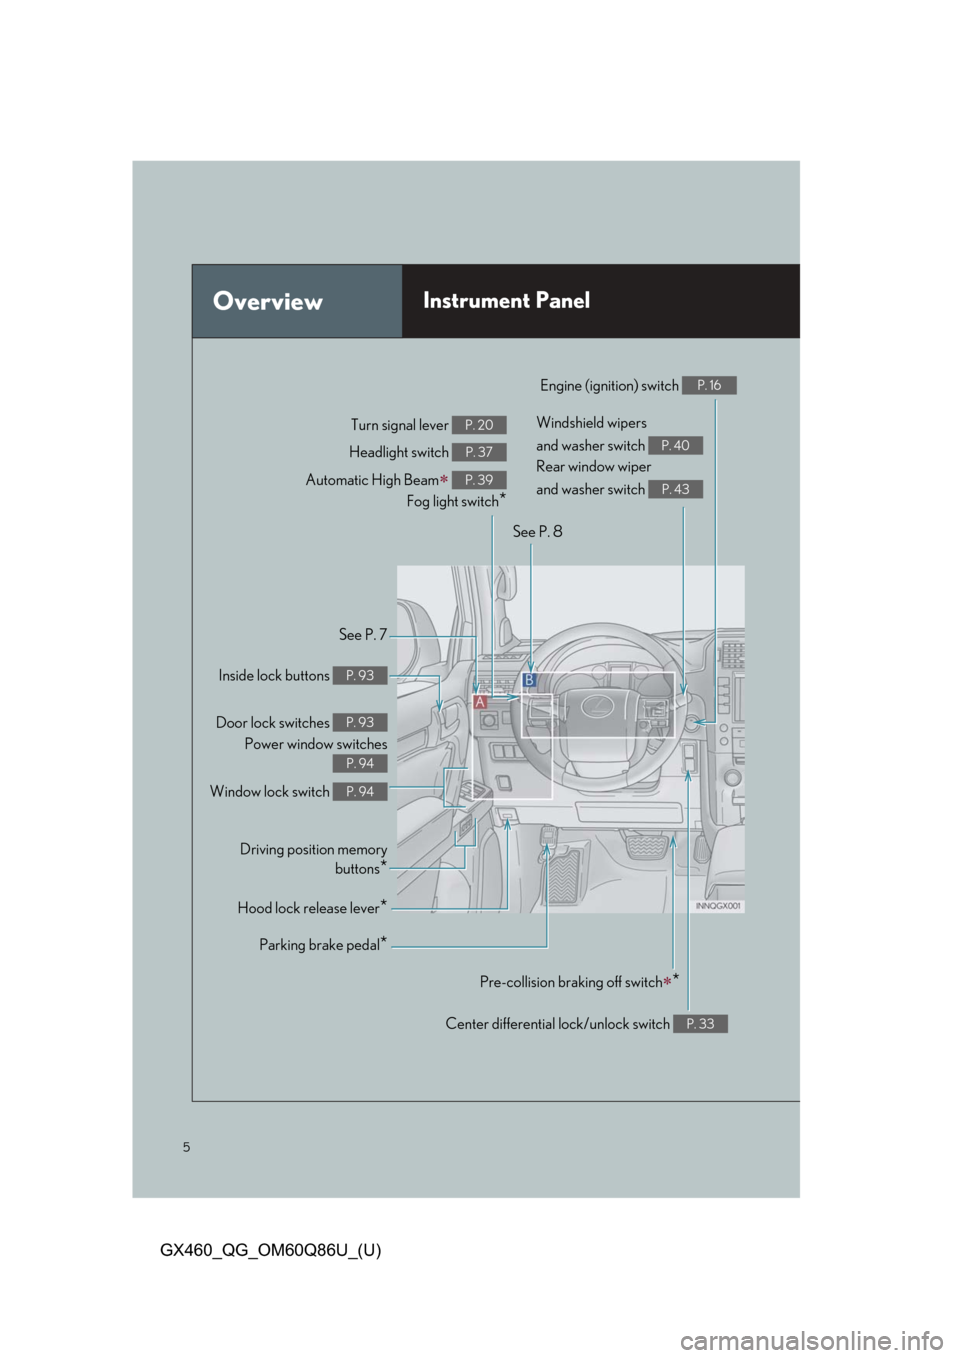 Lexus GX460 2019  Owners Manual / LEXUS 2019 GX460 OWNERS MANUAL QUICK GUIDE (OM60Q86U) 5
GX460_QG_OM60Q86U_(U)
OverviewInstrument Panel
See P. 7
Inside lock buttons 
P. 93
Door lock switches P. 93
Power window switches
P. 94
Window lock switch P. 94
Driving position memory buttons
*
Hoo